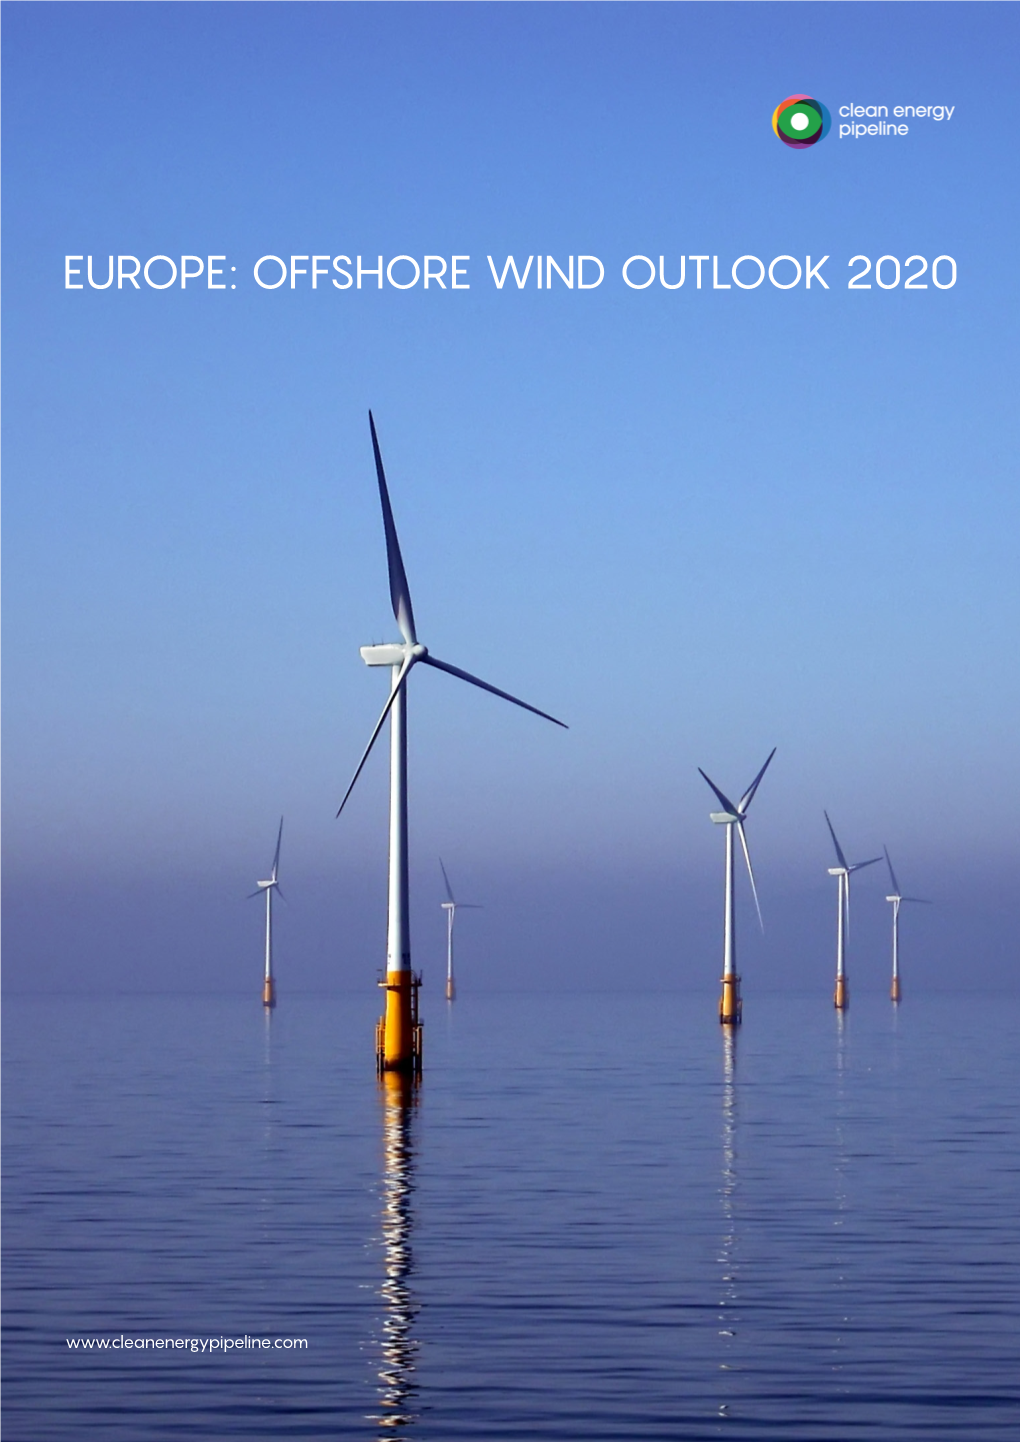 Europe: Offshore Wind Outlook 2020